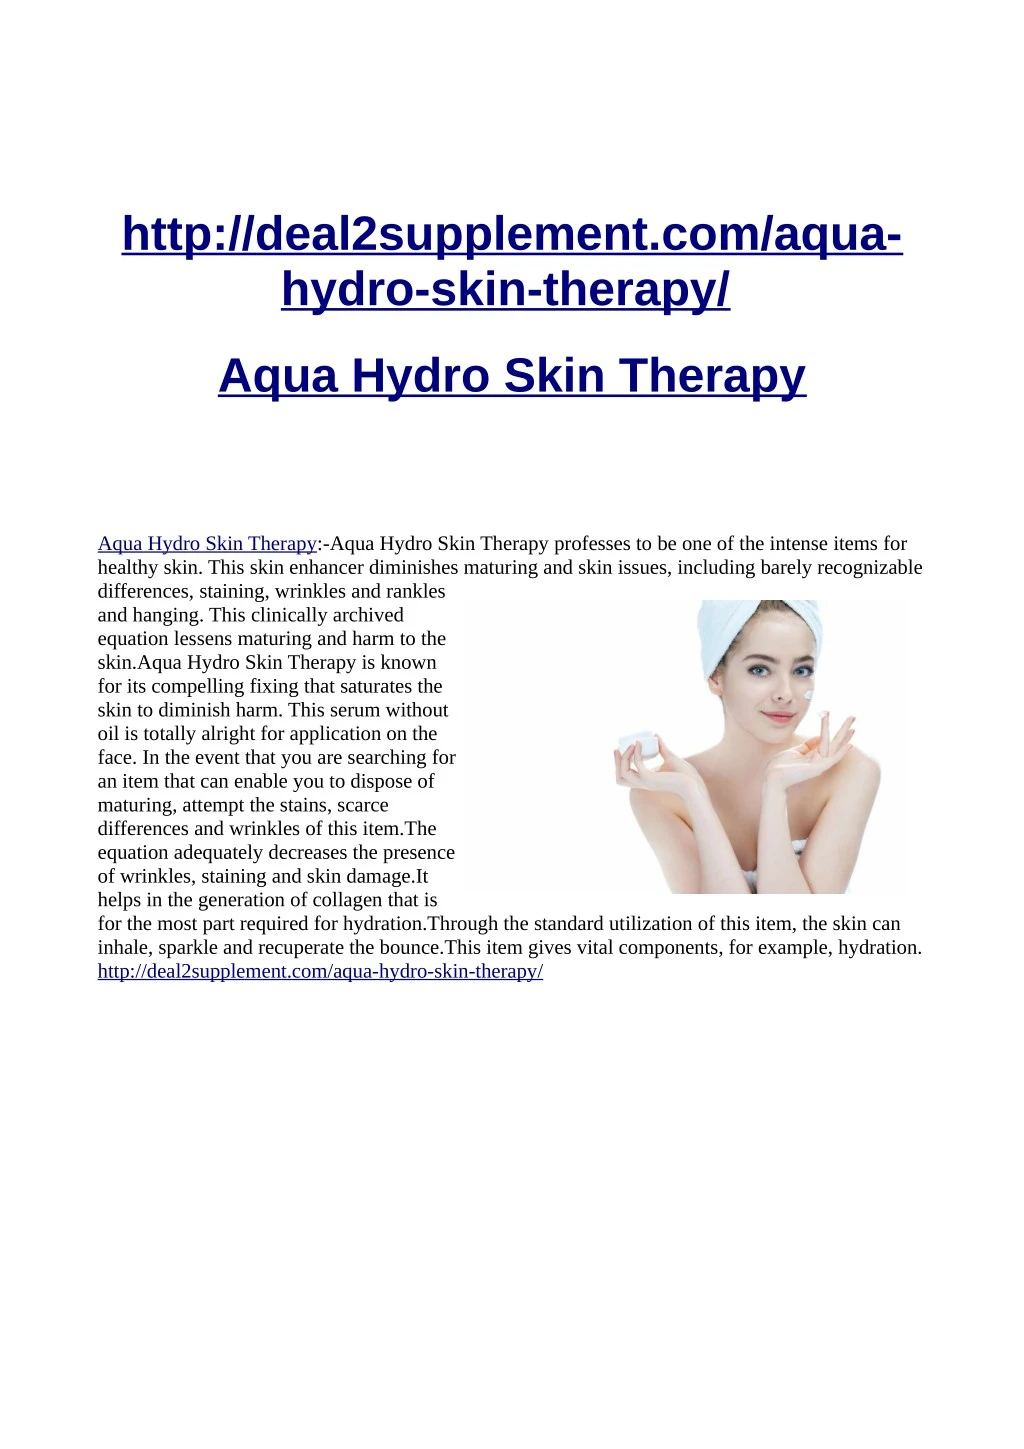 http deal2supplement com aqua hydro skin therapy